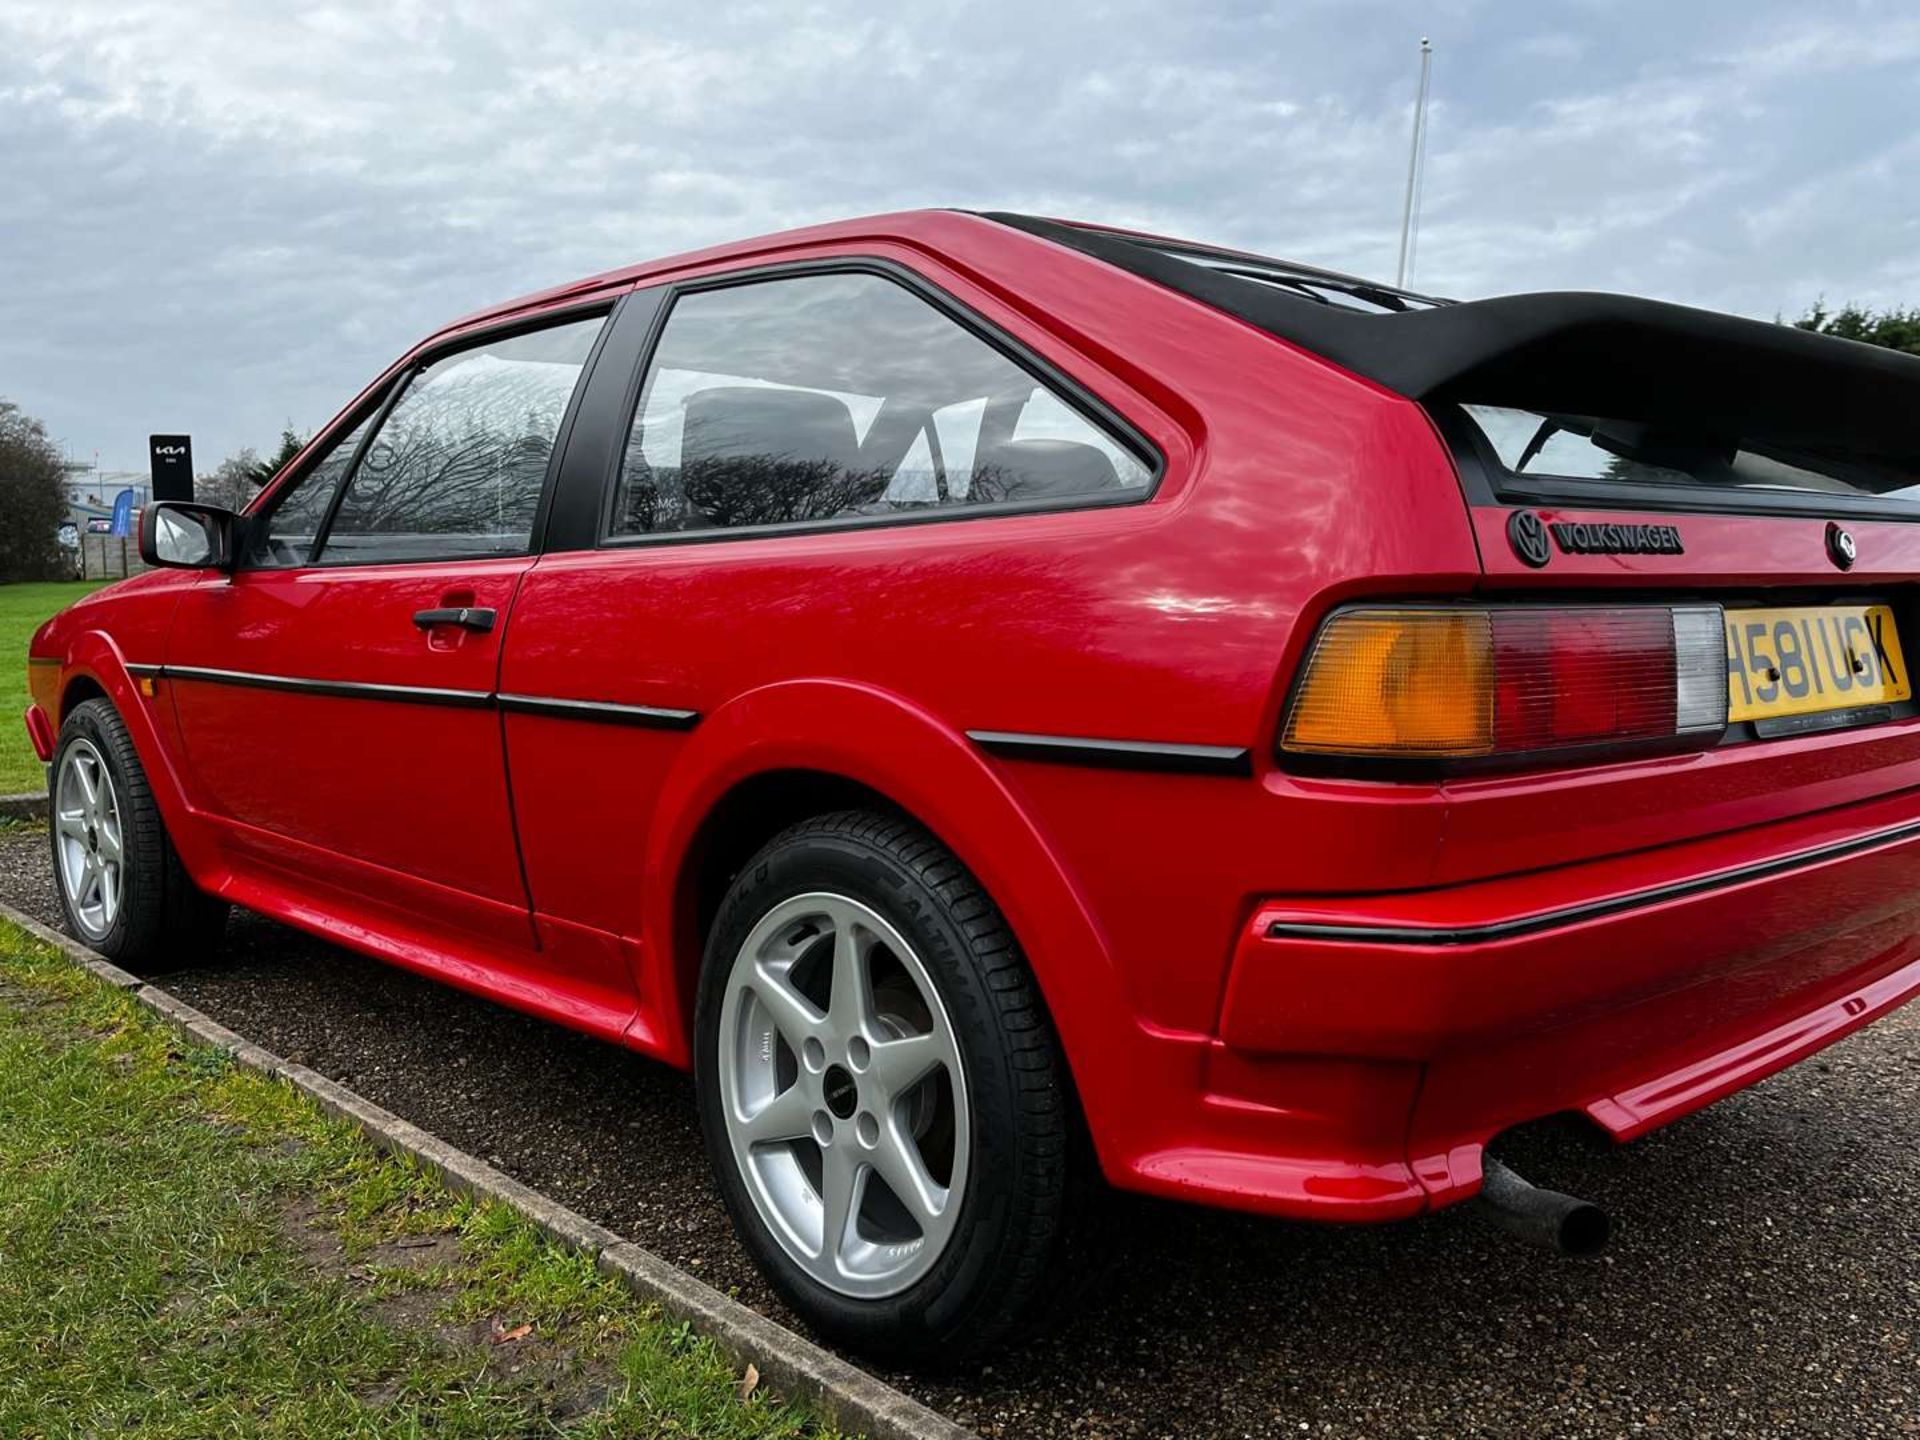 1990 VW SCIROCCO 1.8 GT - Image 16 of 29